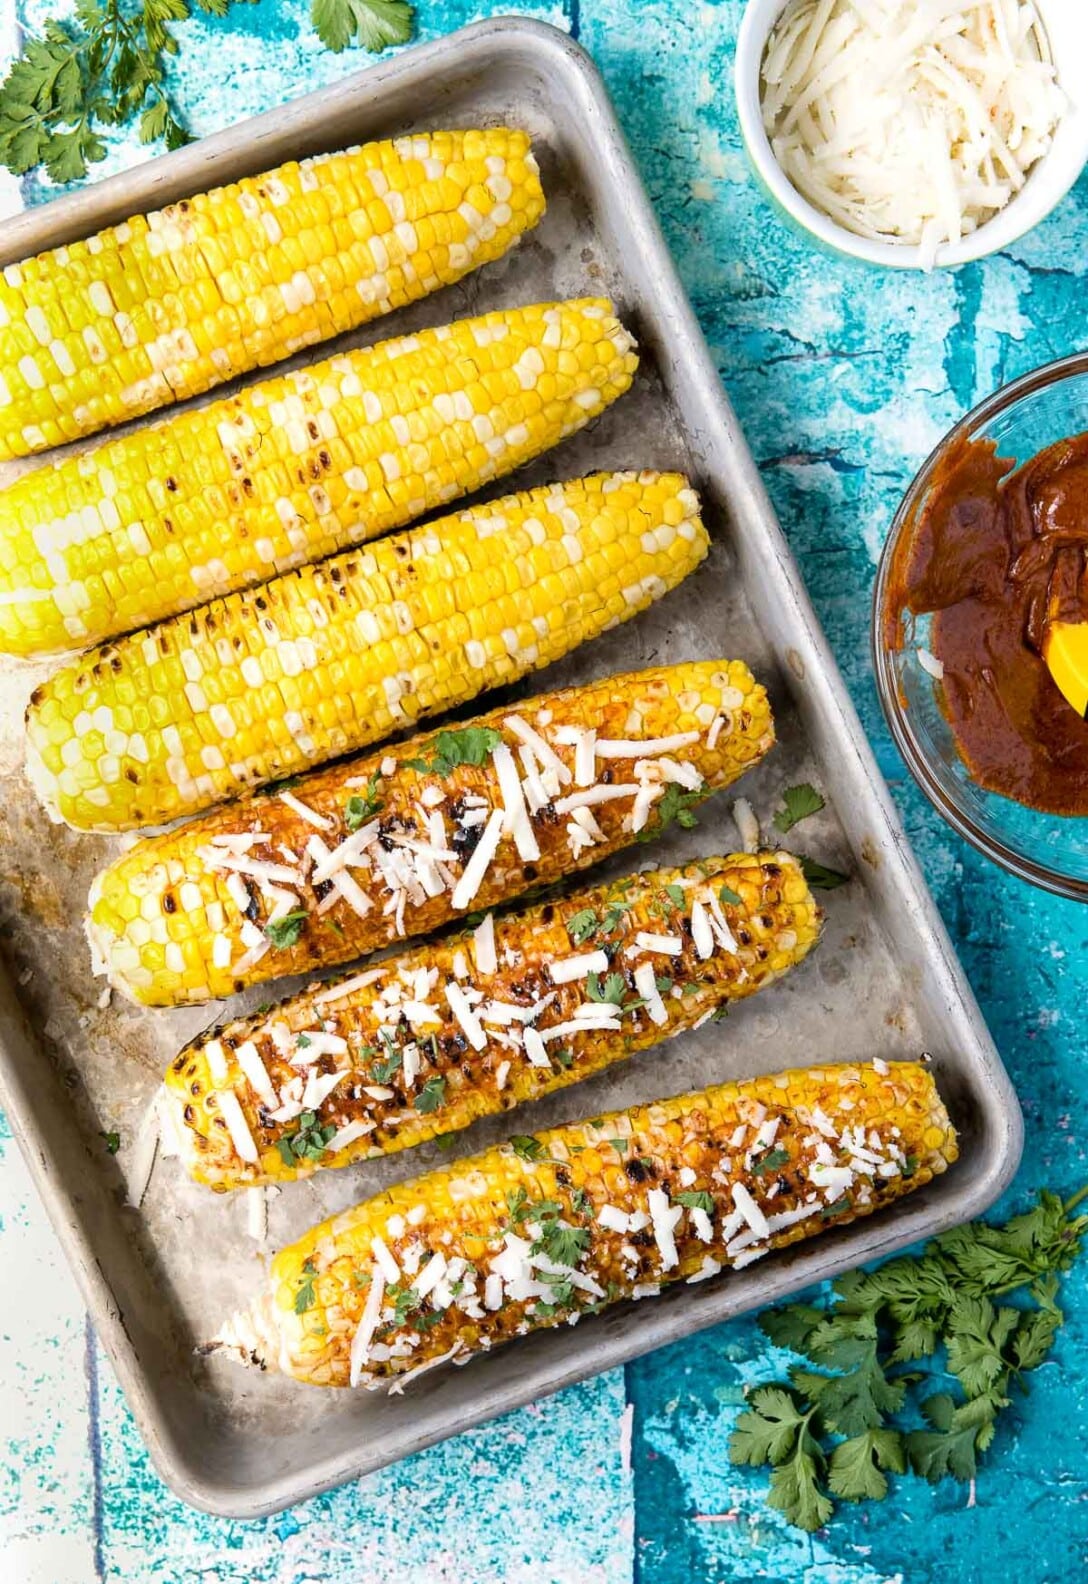 How to Make Grilled Mexican Corn - An Easy Elote Recipe